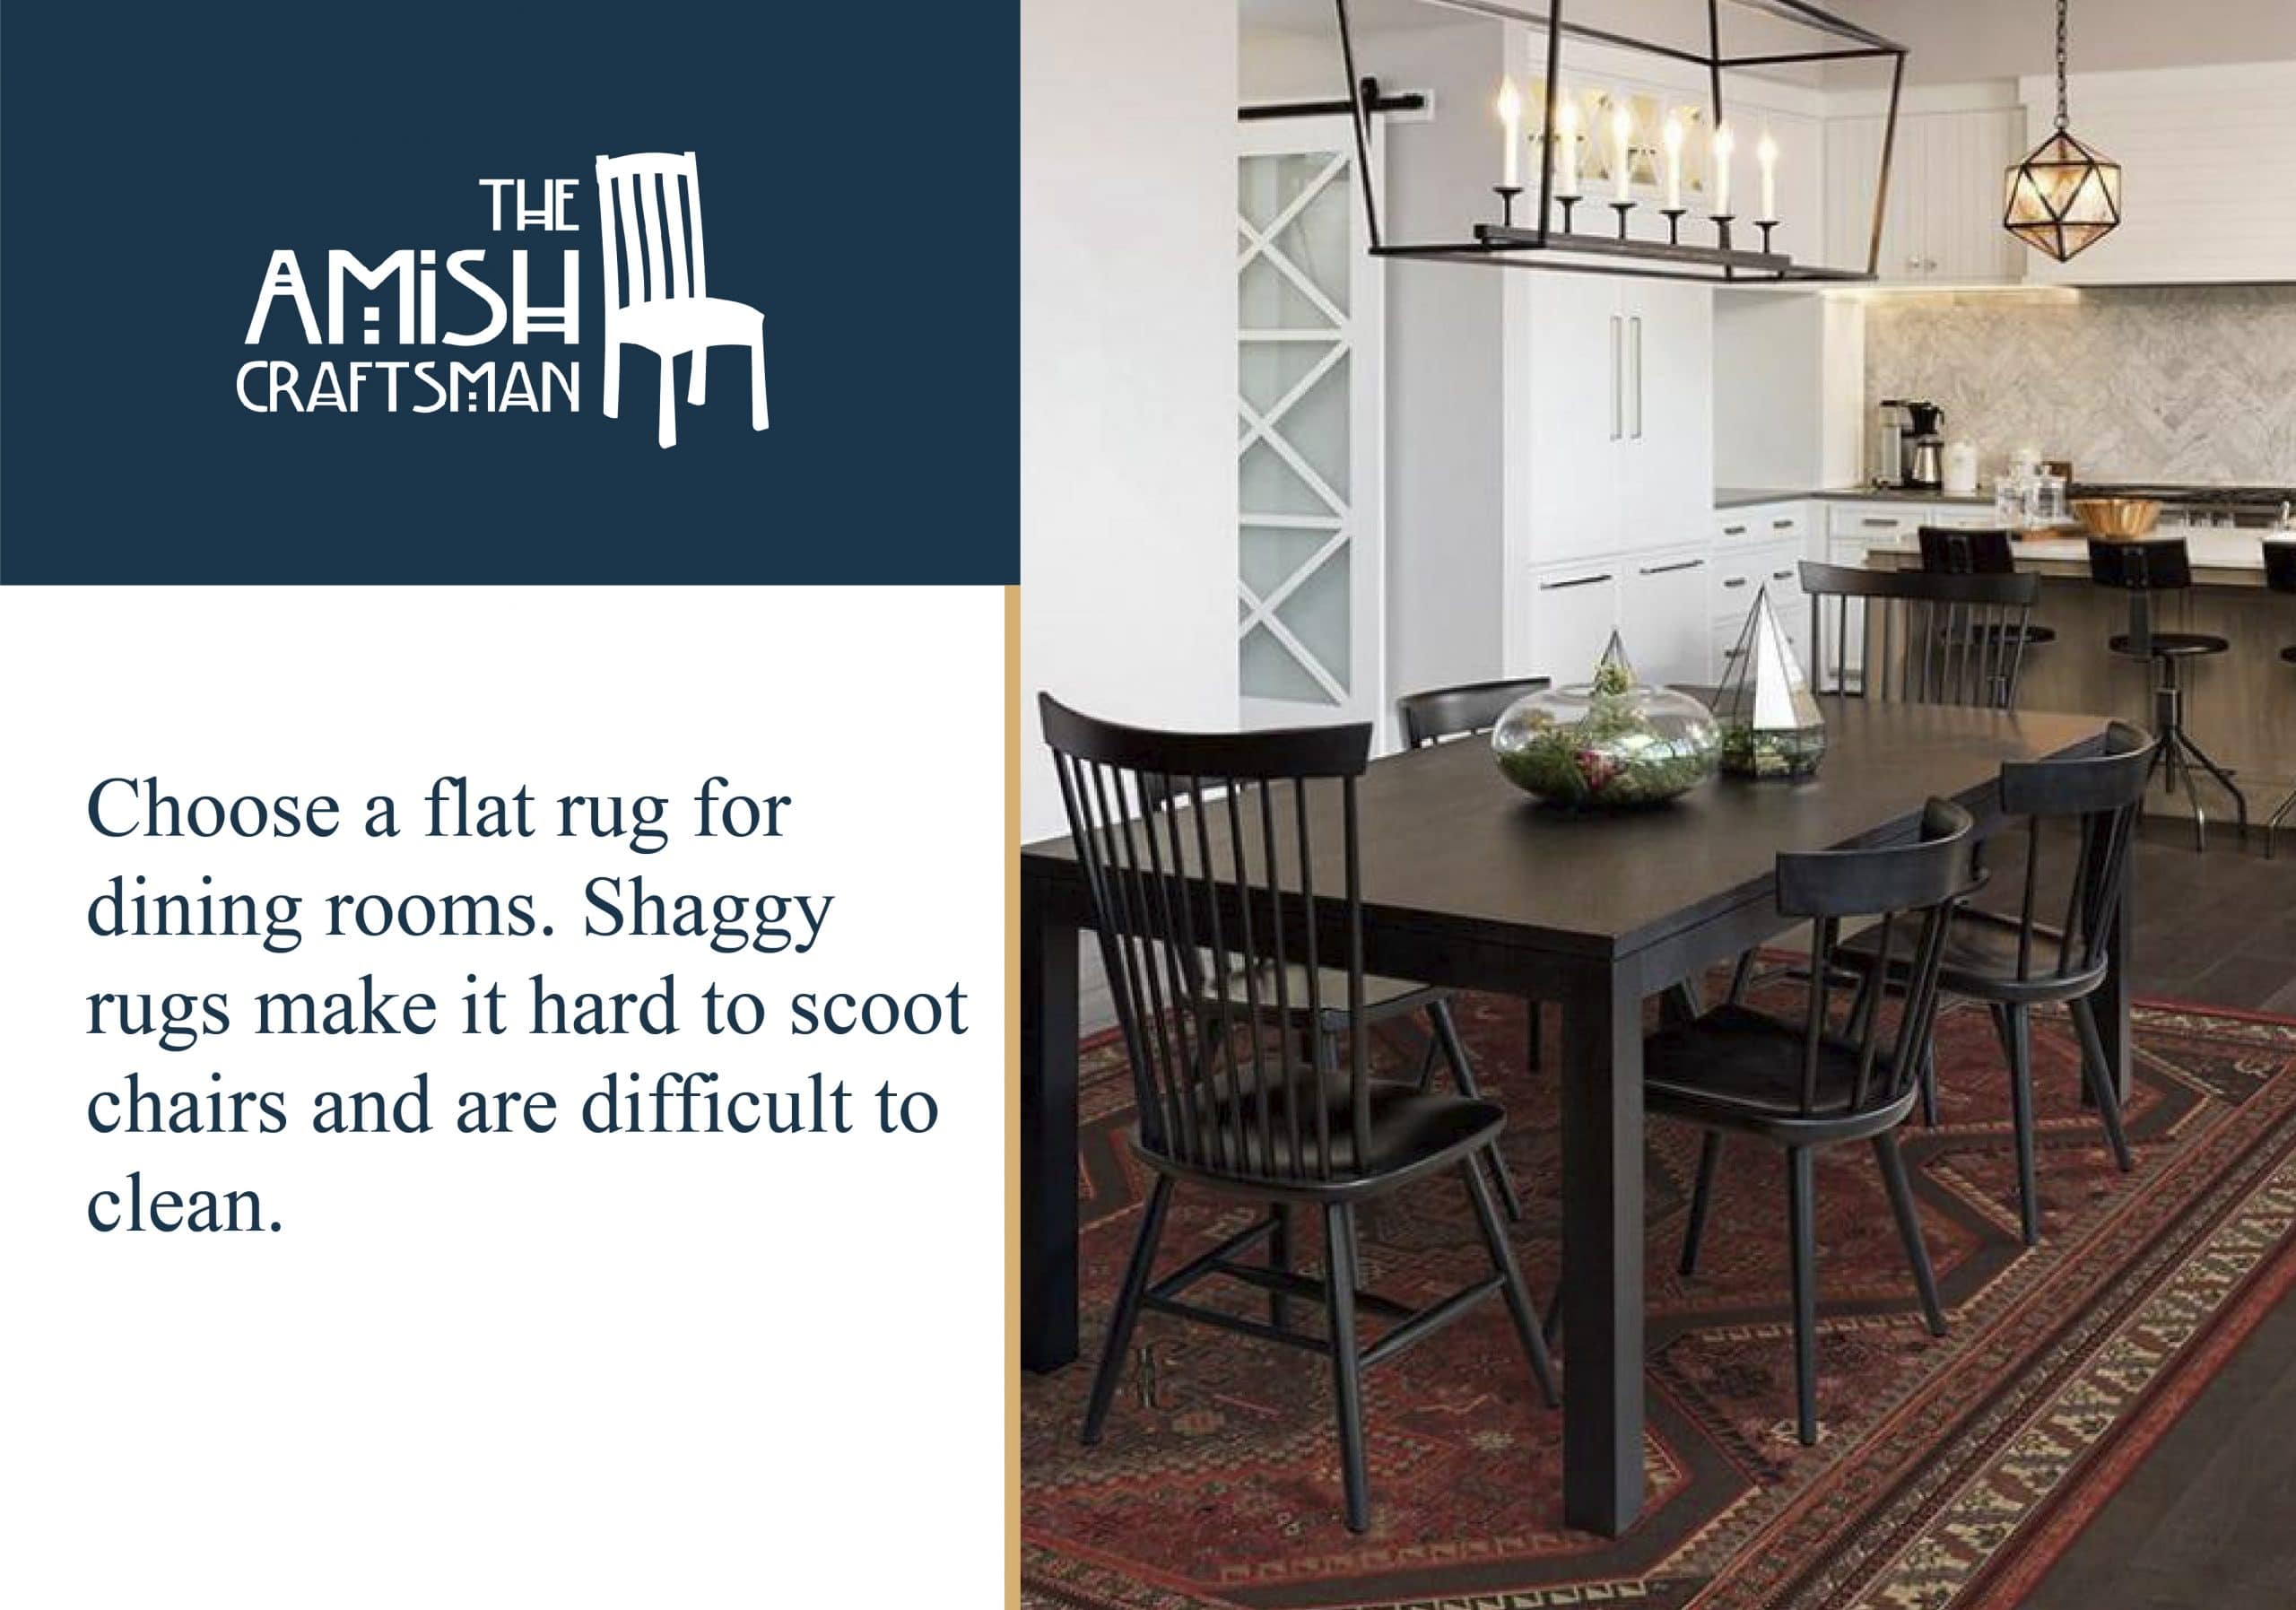 flat rugs work best in dining rooms